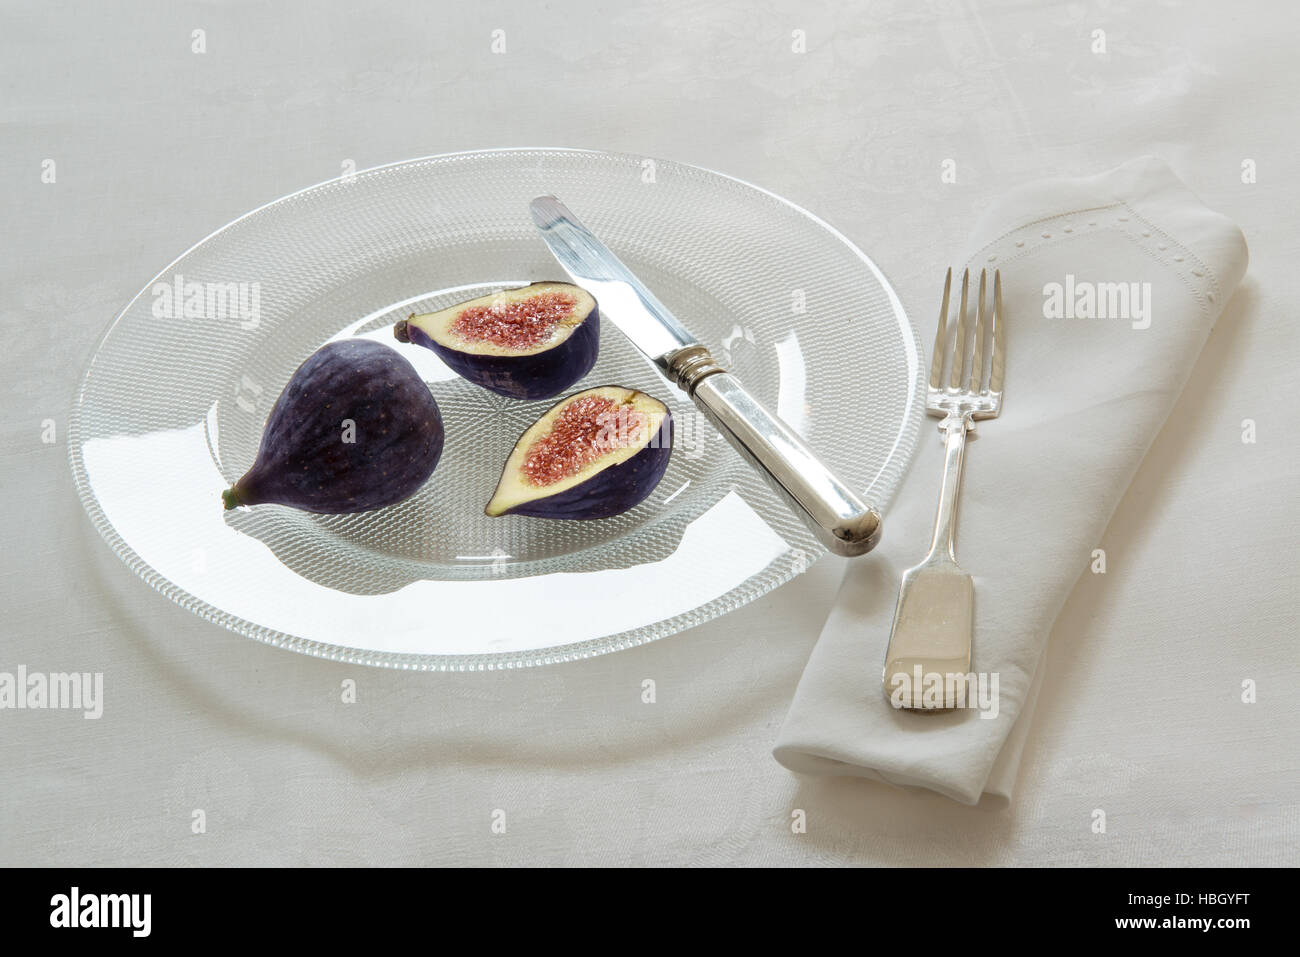 Figs on a plate Stock Photo